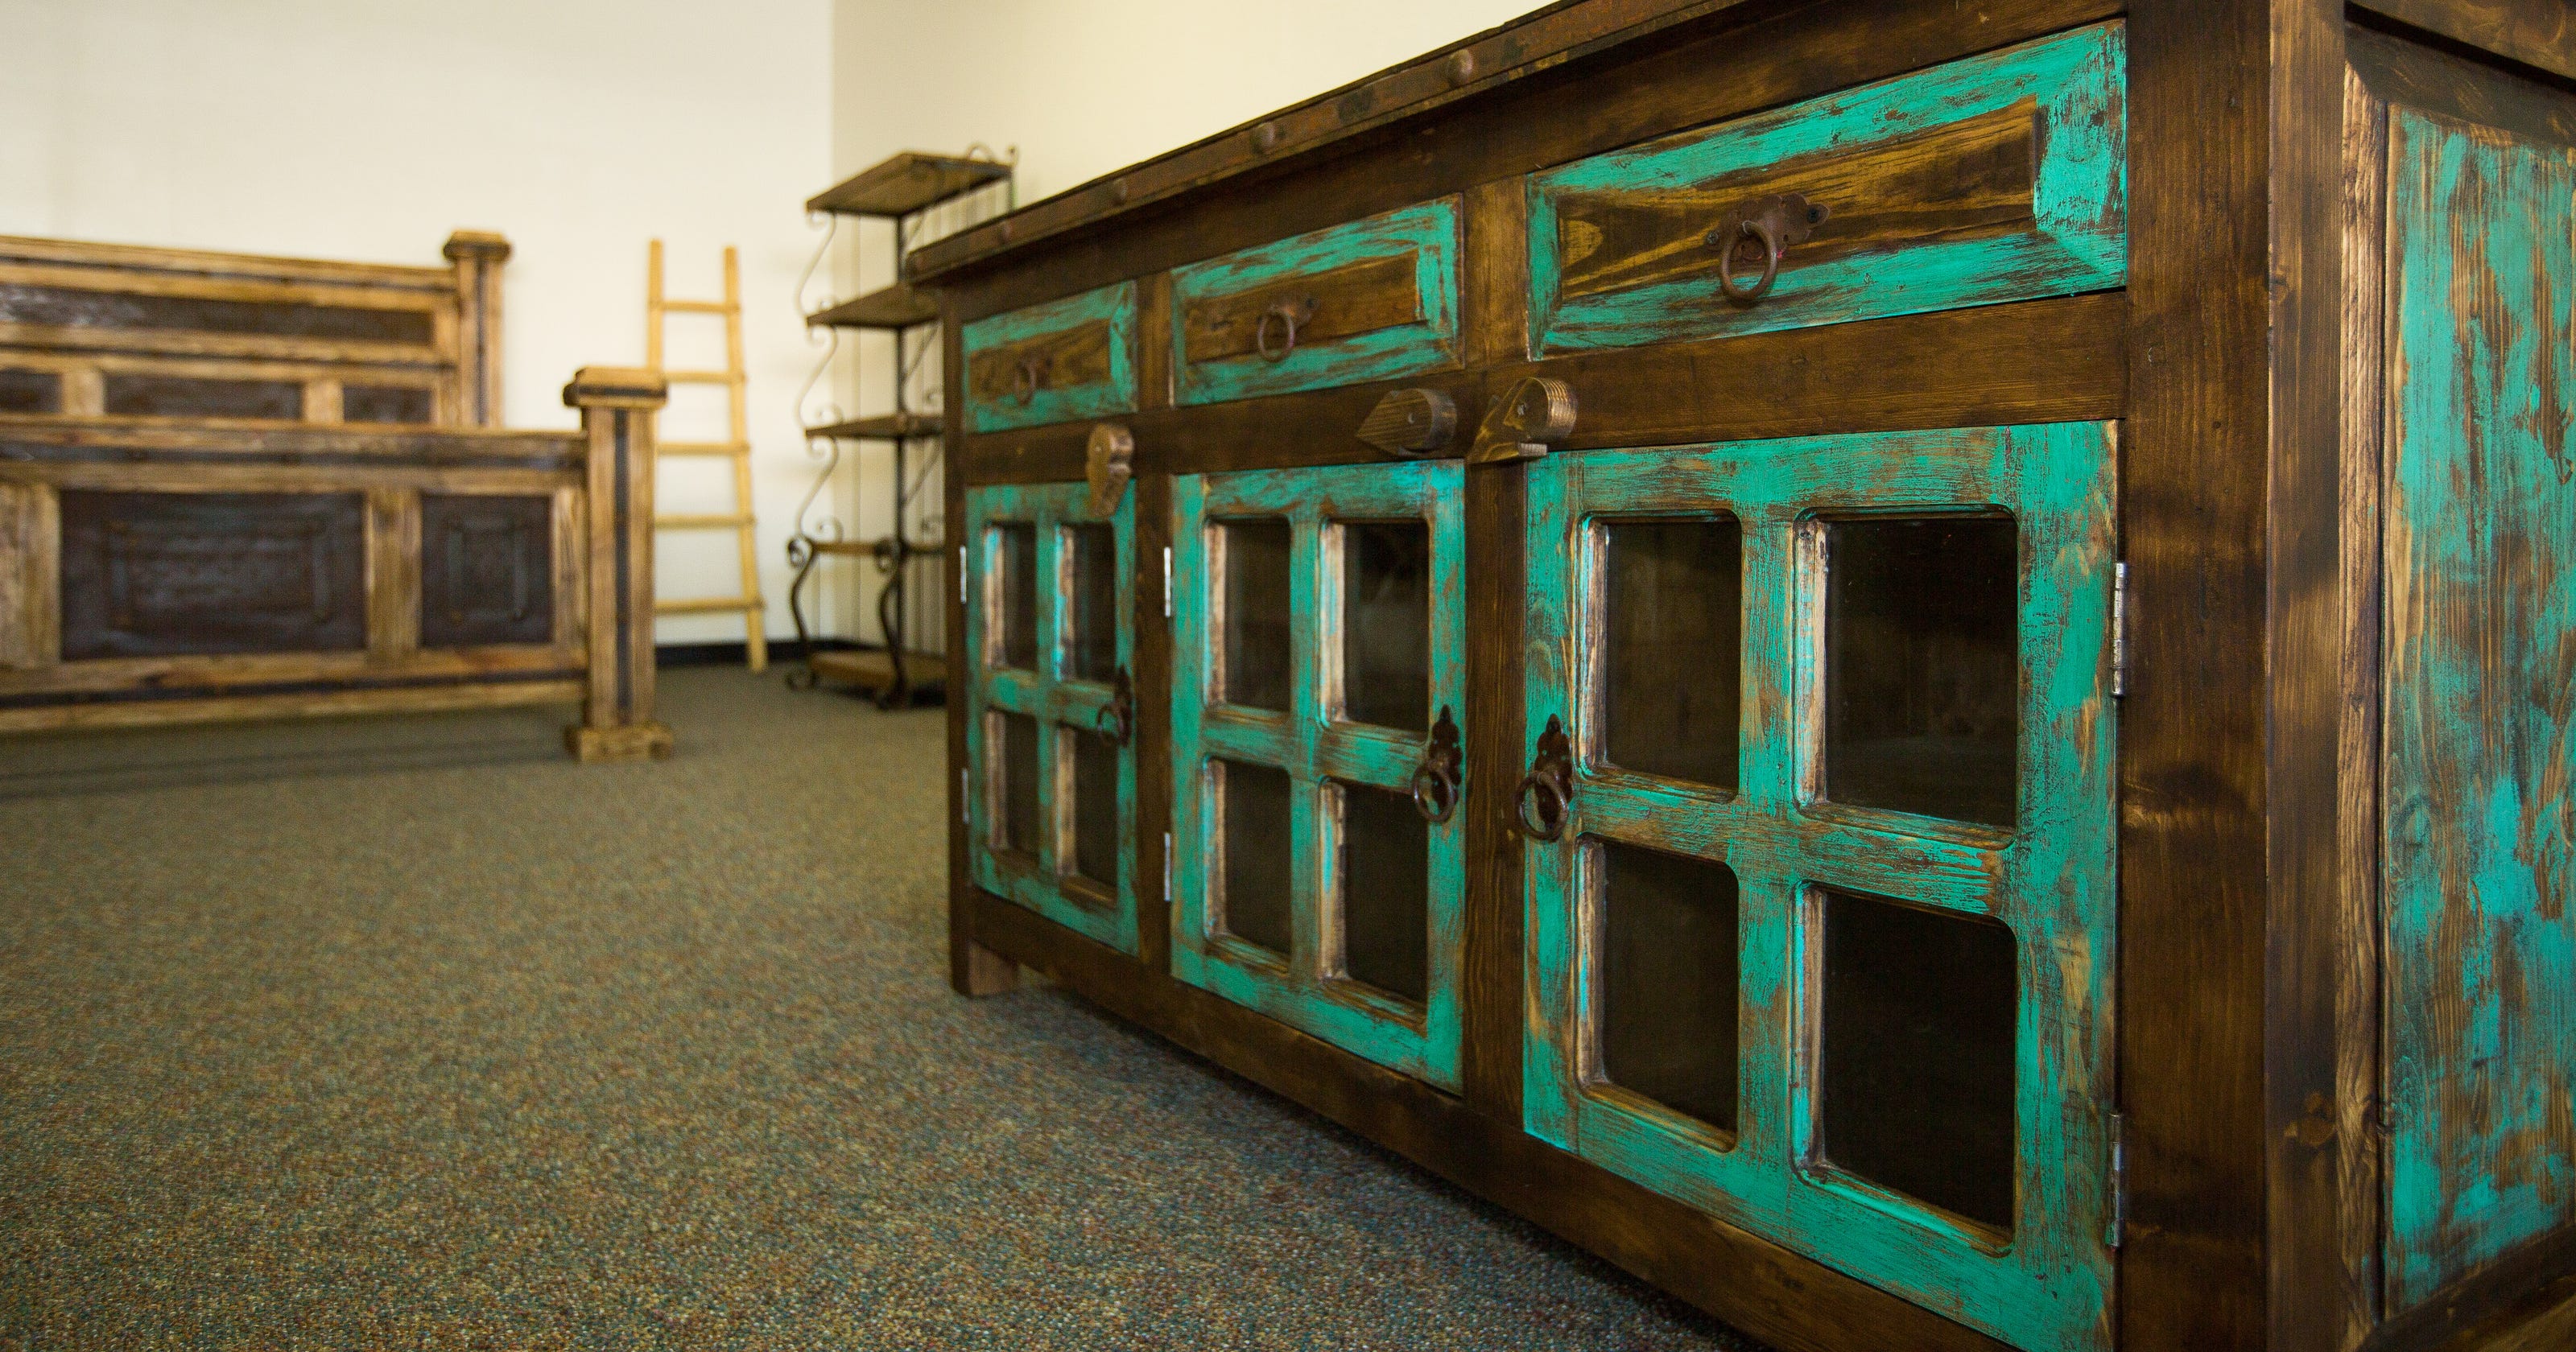 Rustic Imports features handmade furniture from Mexico